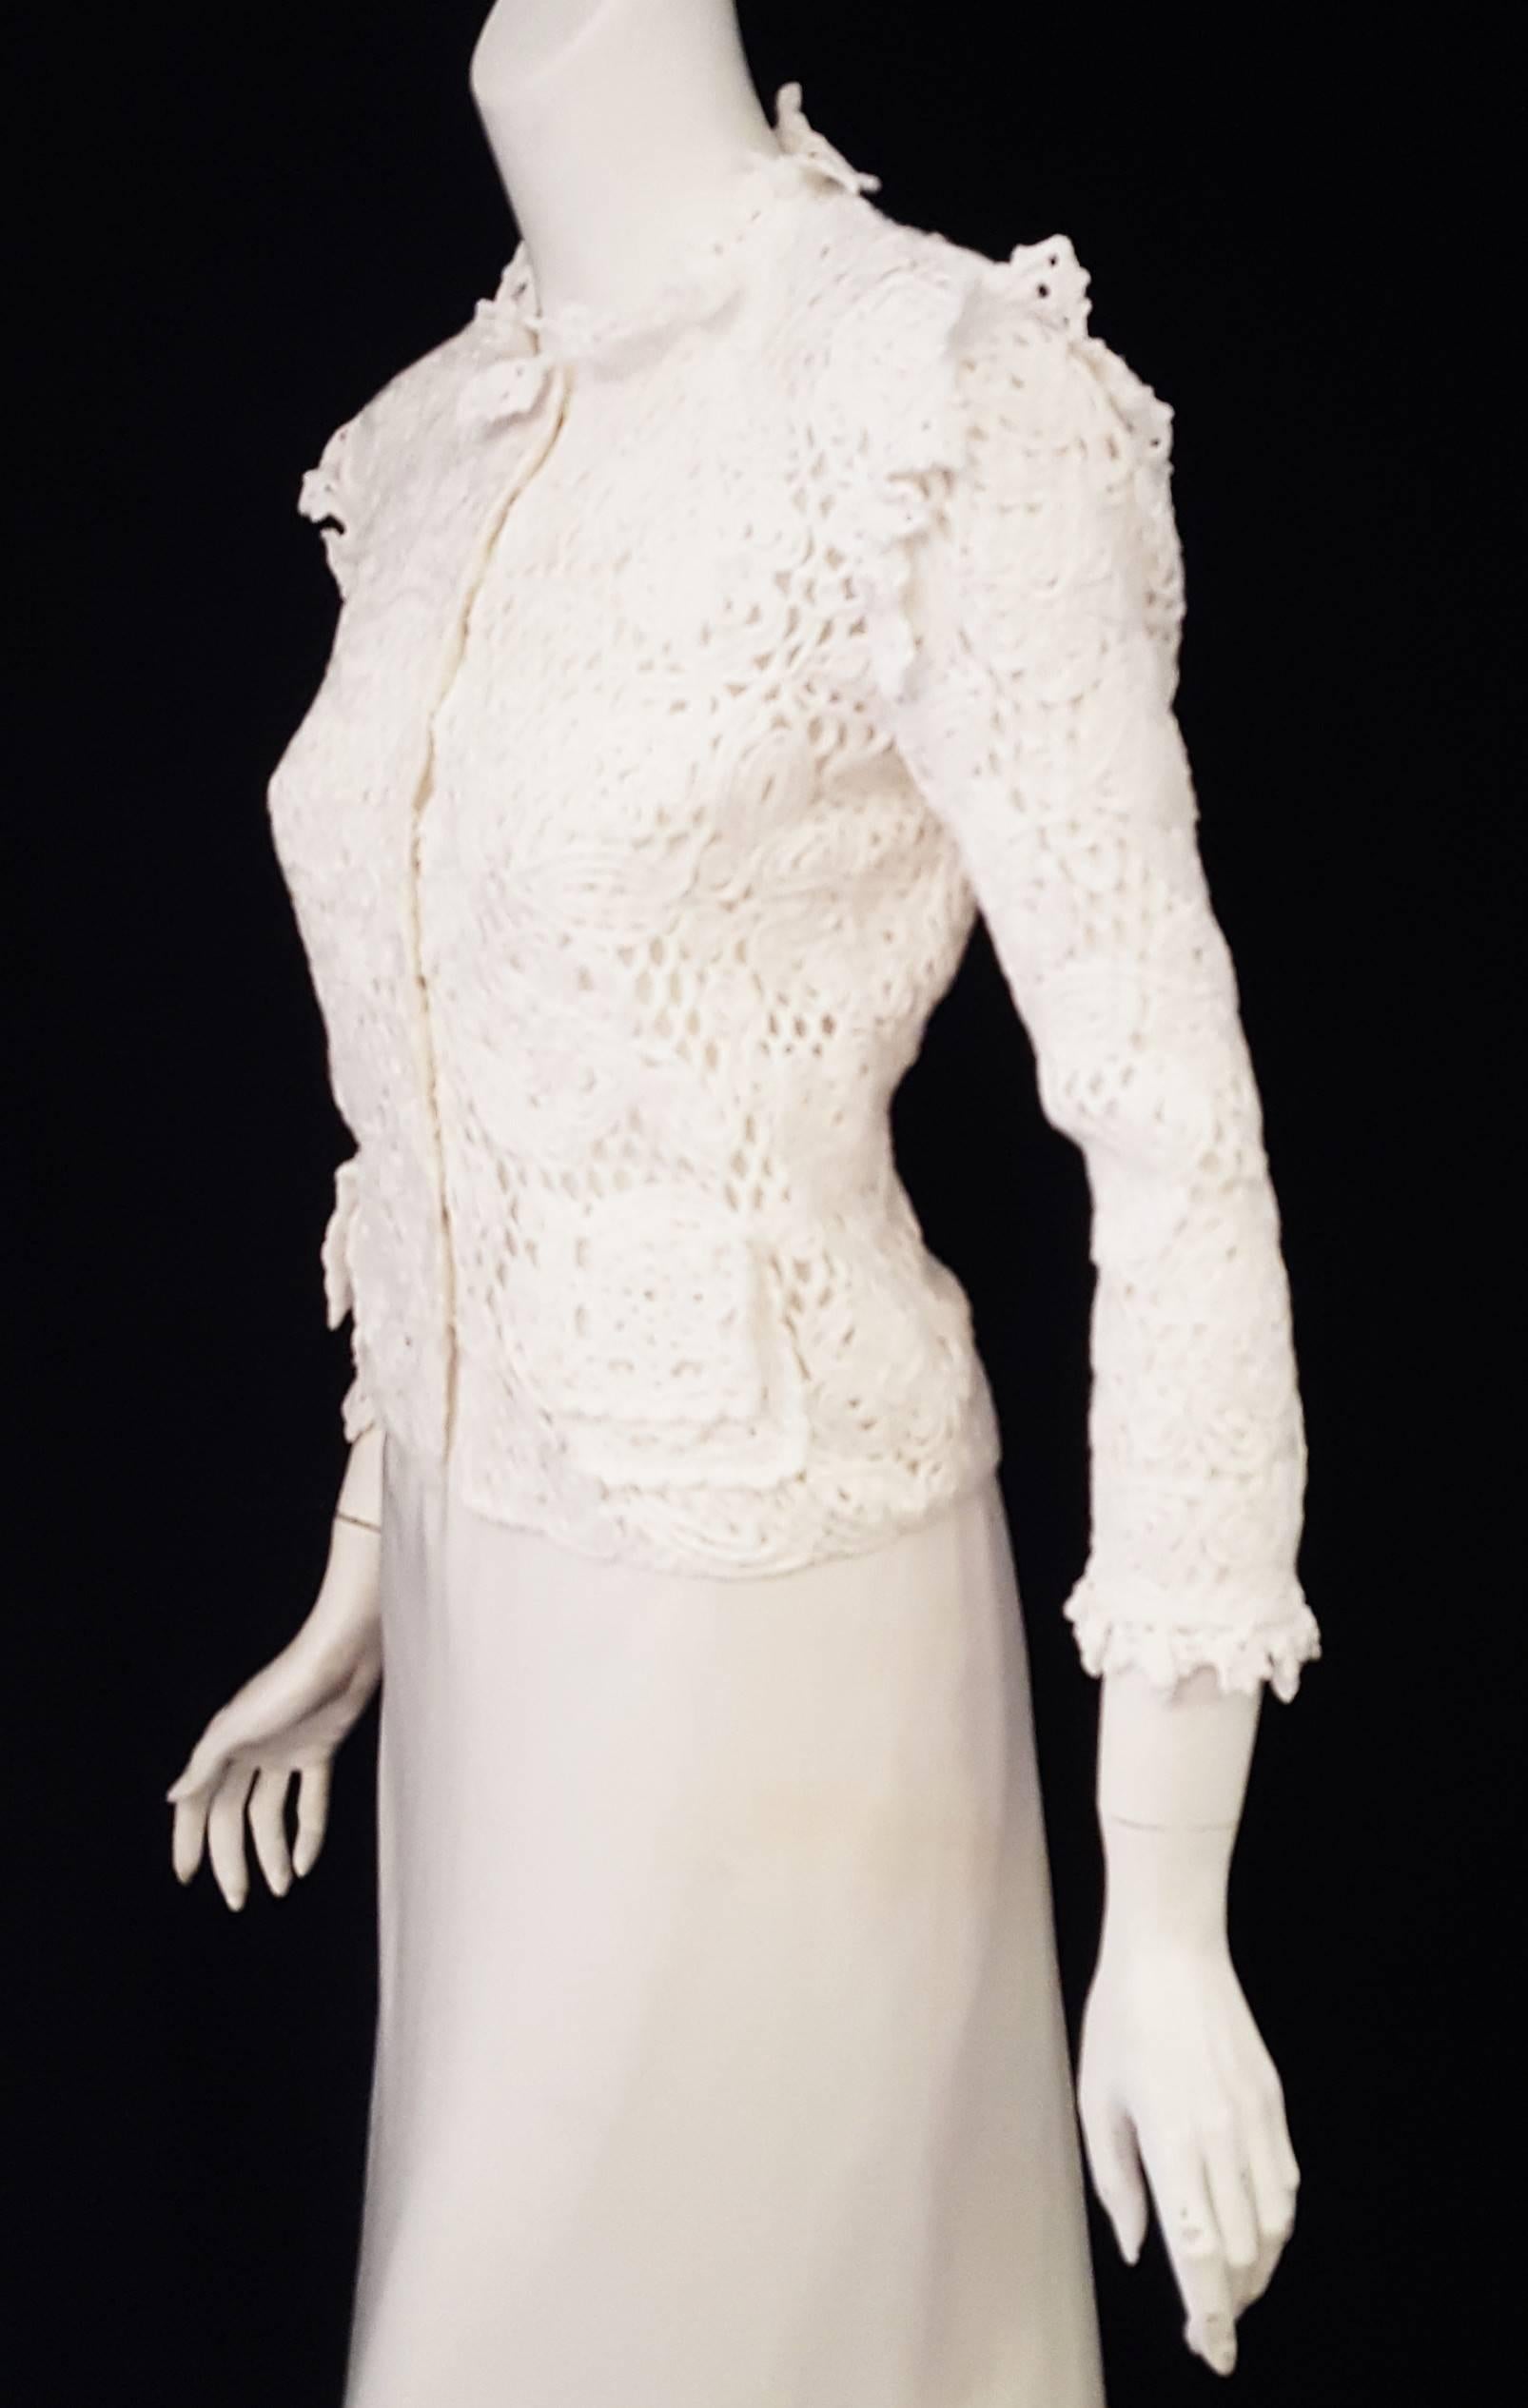 Dolce & Gabbana cropped white 100% cotton crochet jacket with a flower design throughout is a special edition piece from the 2011 spring/summer collection.  For closure, this jacket features 9 snaps at front.  This garment highlights the romanticism